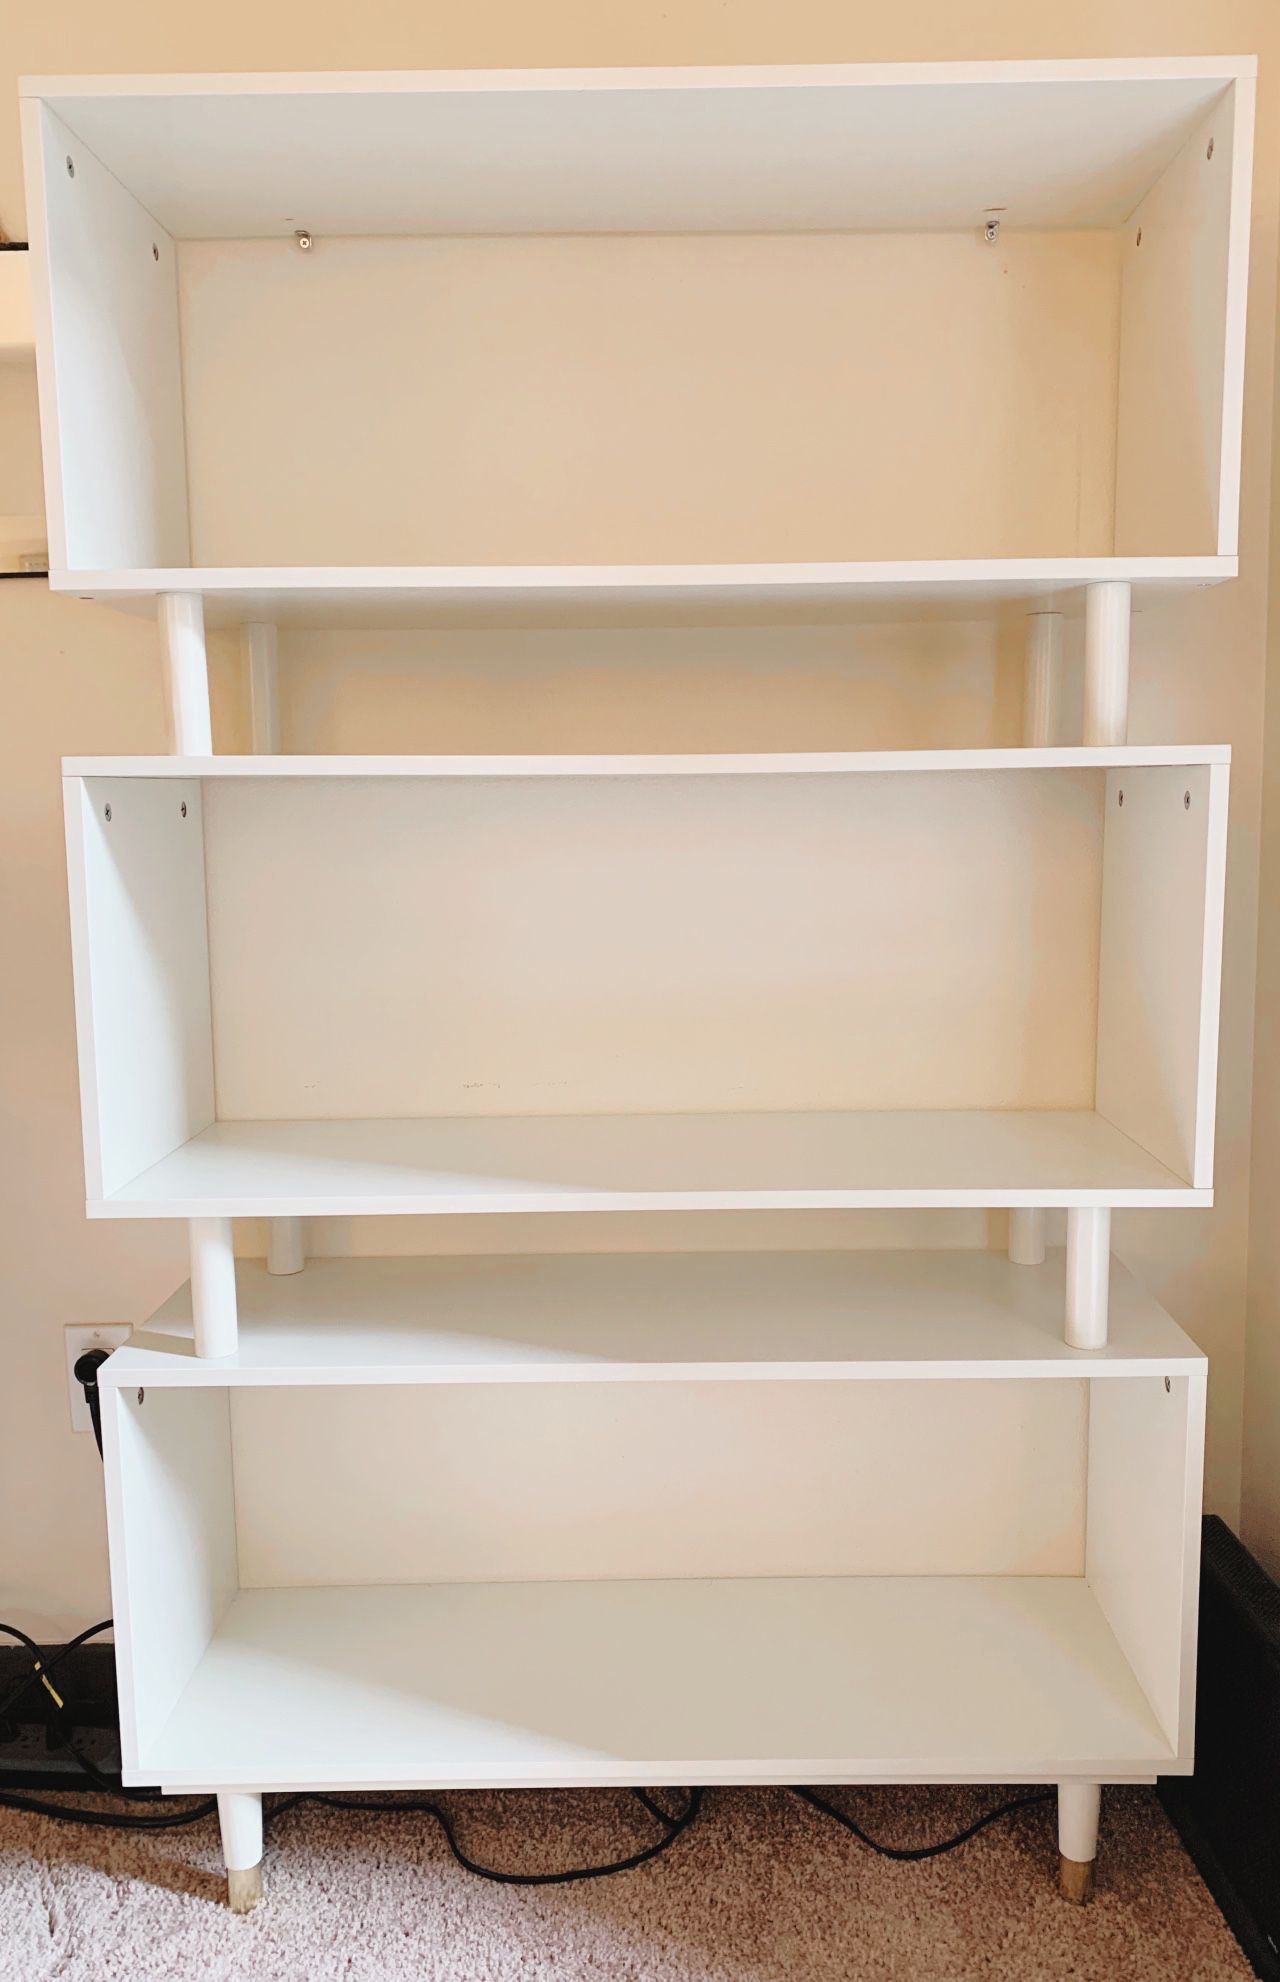 Wayfair Camylle Standard Bookcase with wall fasteners